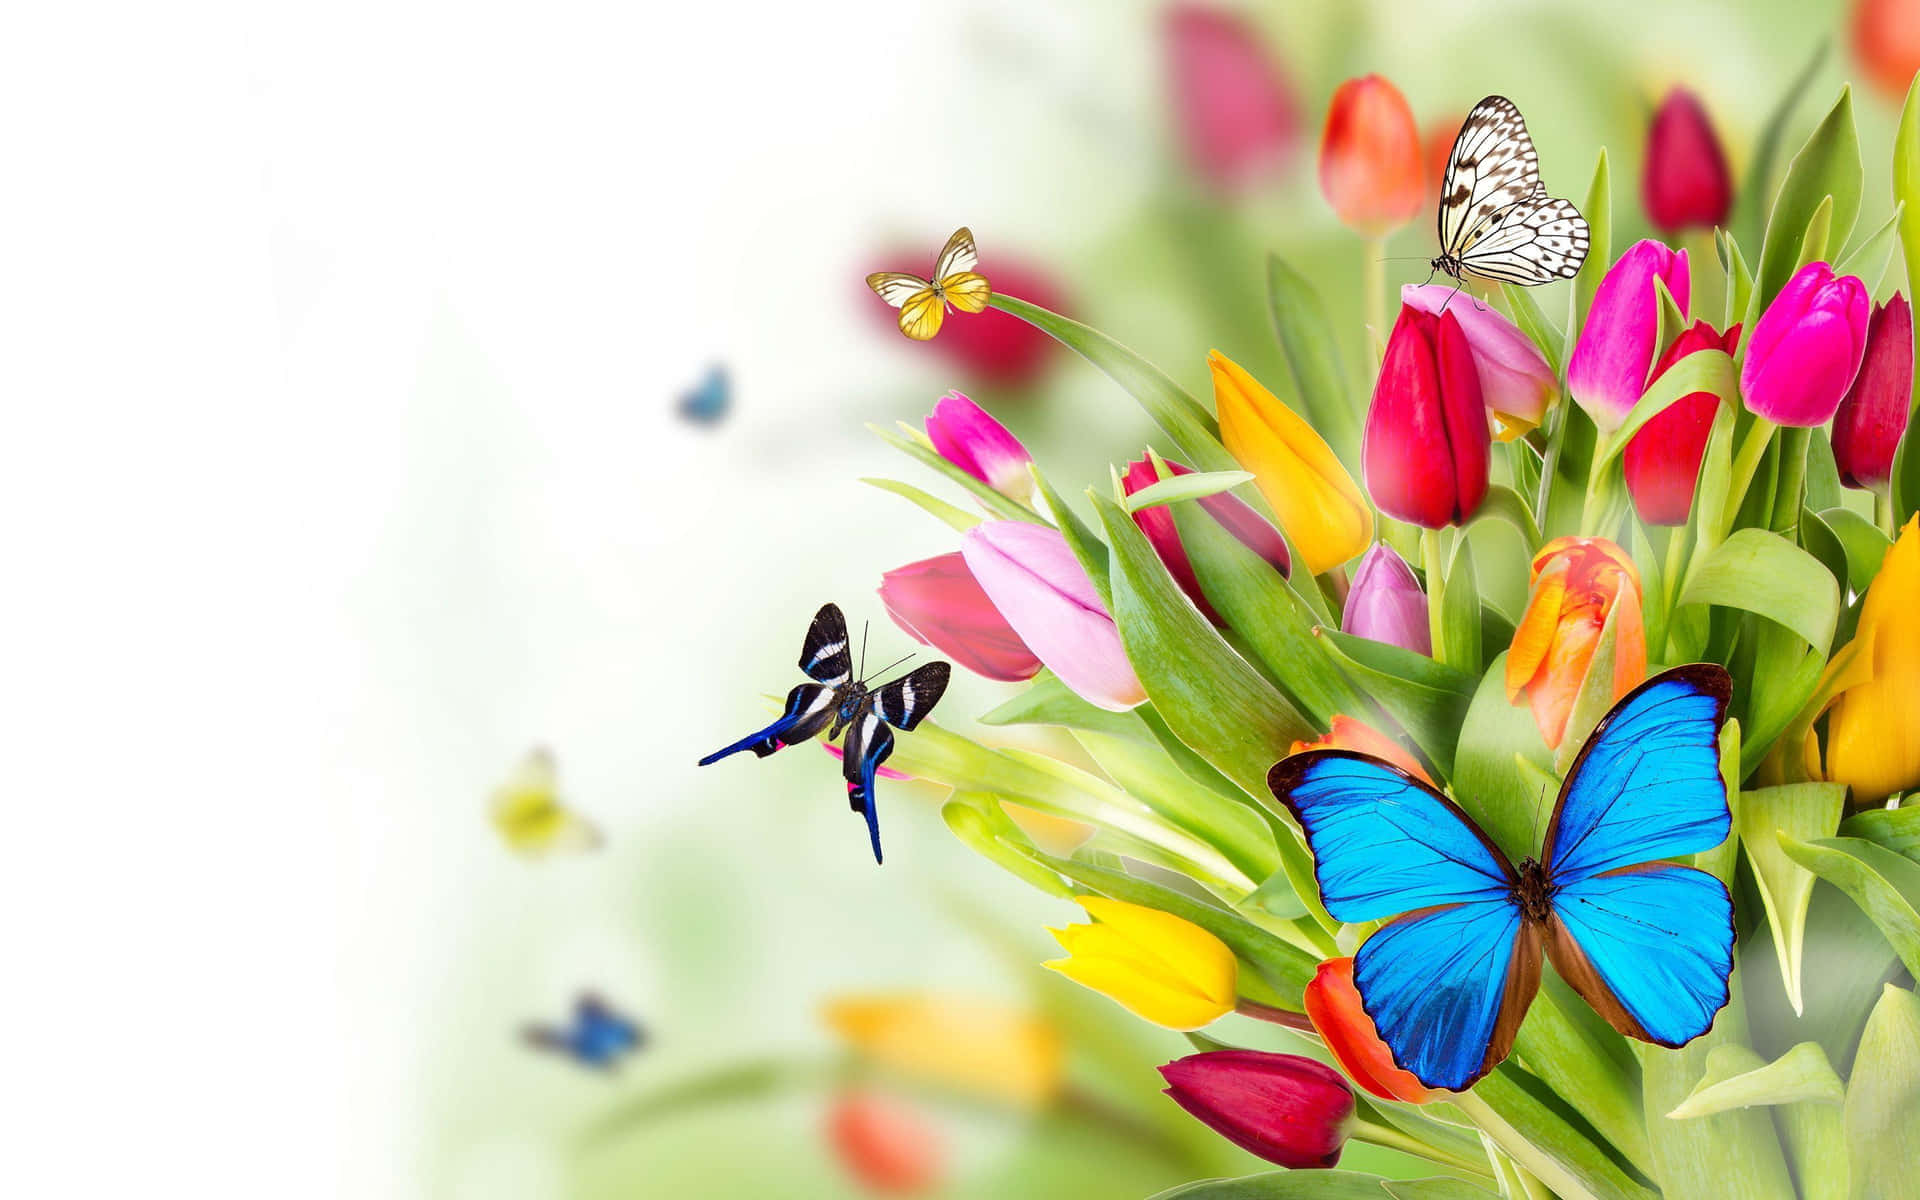 A colorful butterfly garden full of beautiful plants Wallpaper